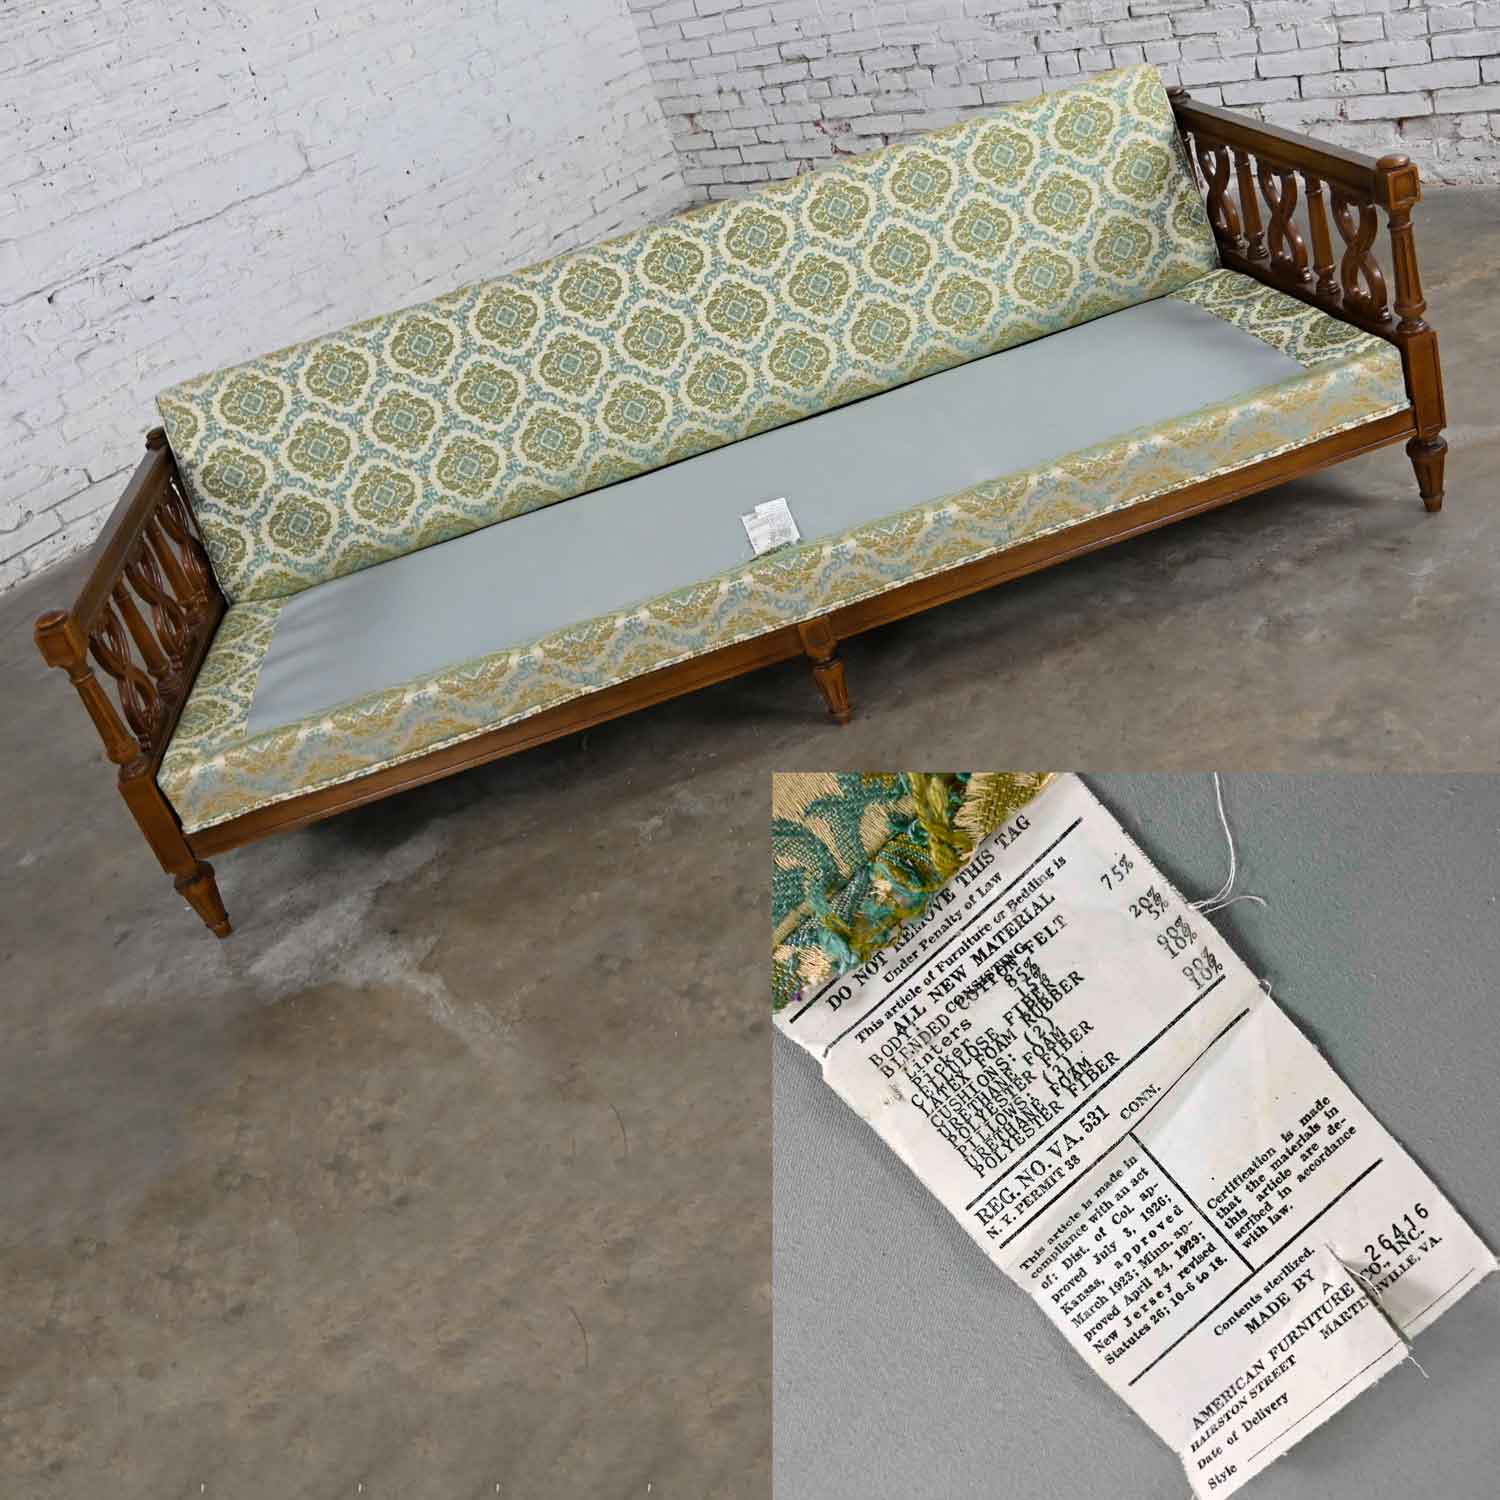 Vintage Mediterranean Spanish Revival Style Sofa by American of Martinsville